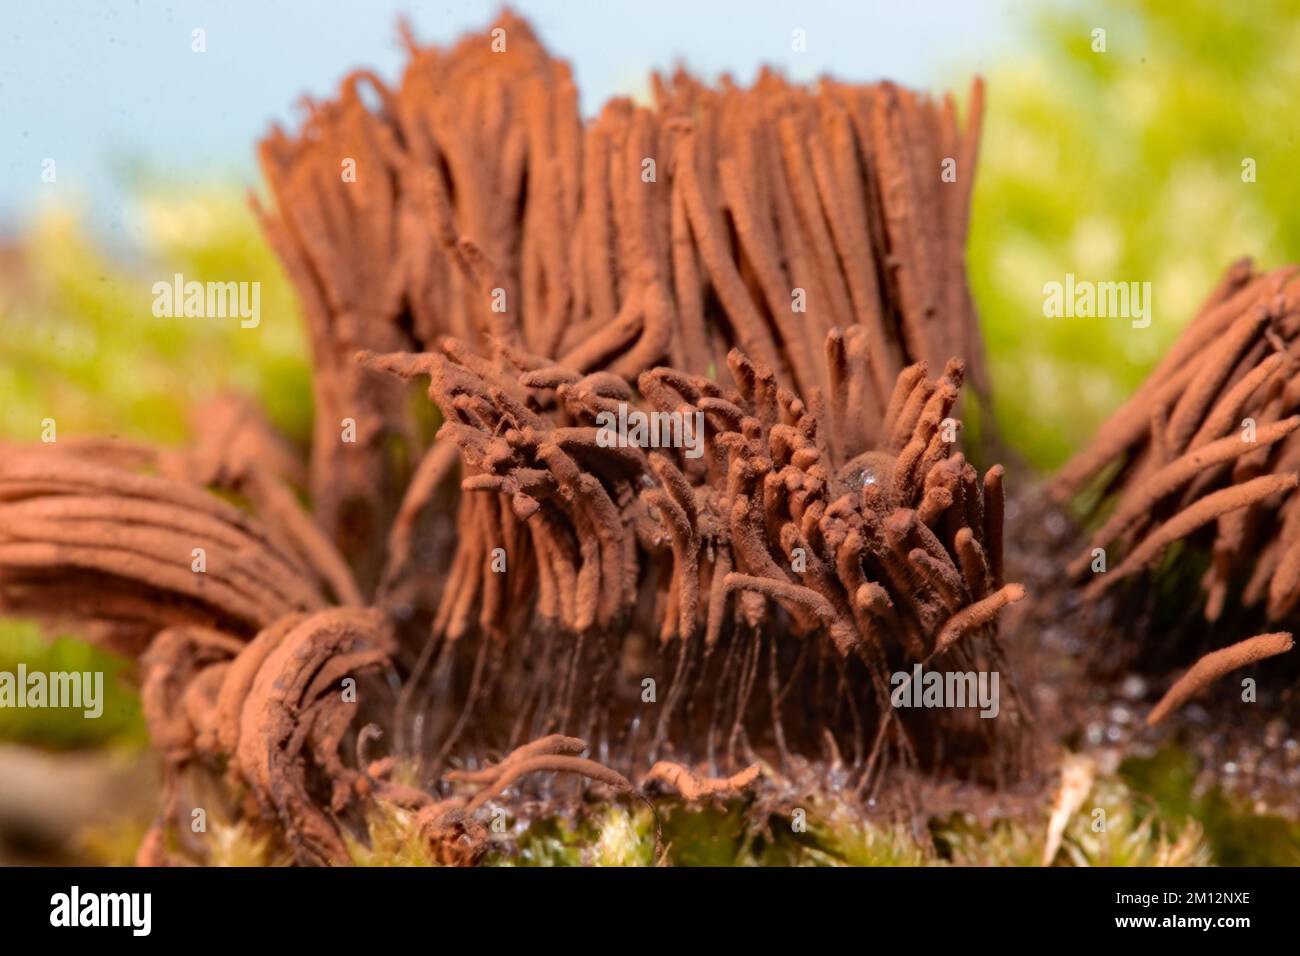 Tufted slime mould Fruiting body with many light brown stalks Stock Photo